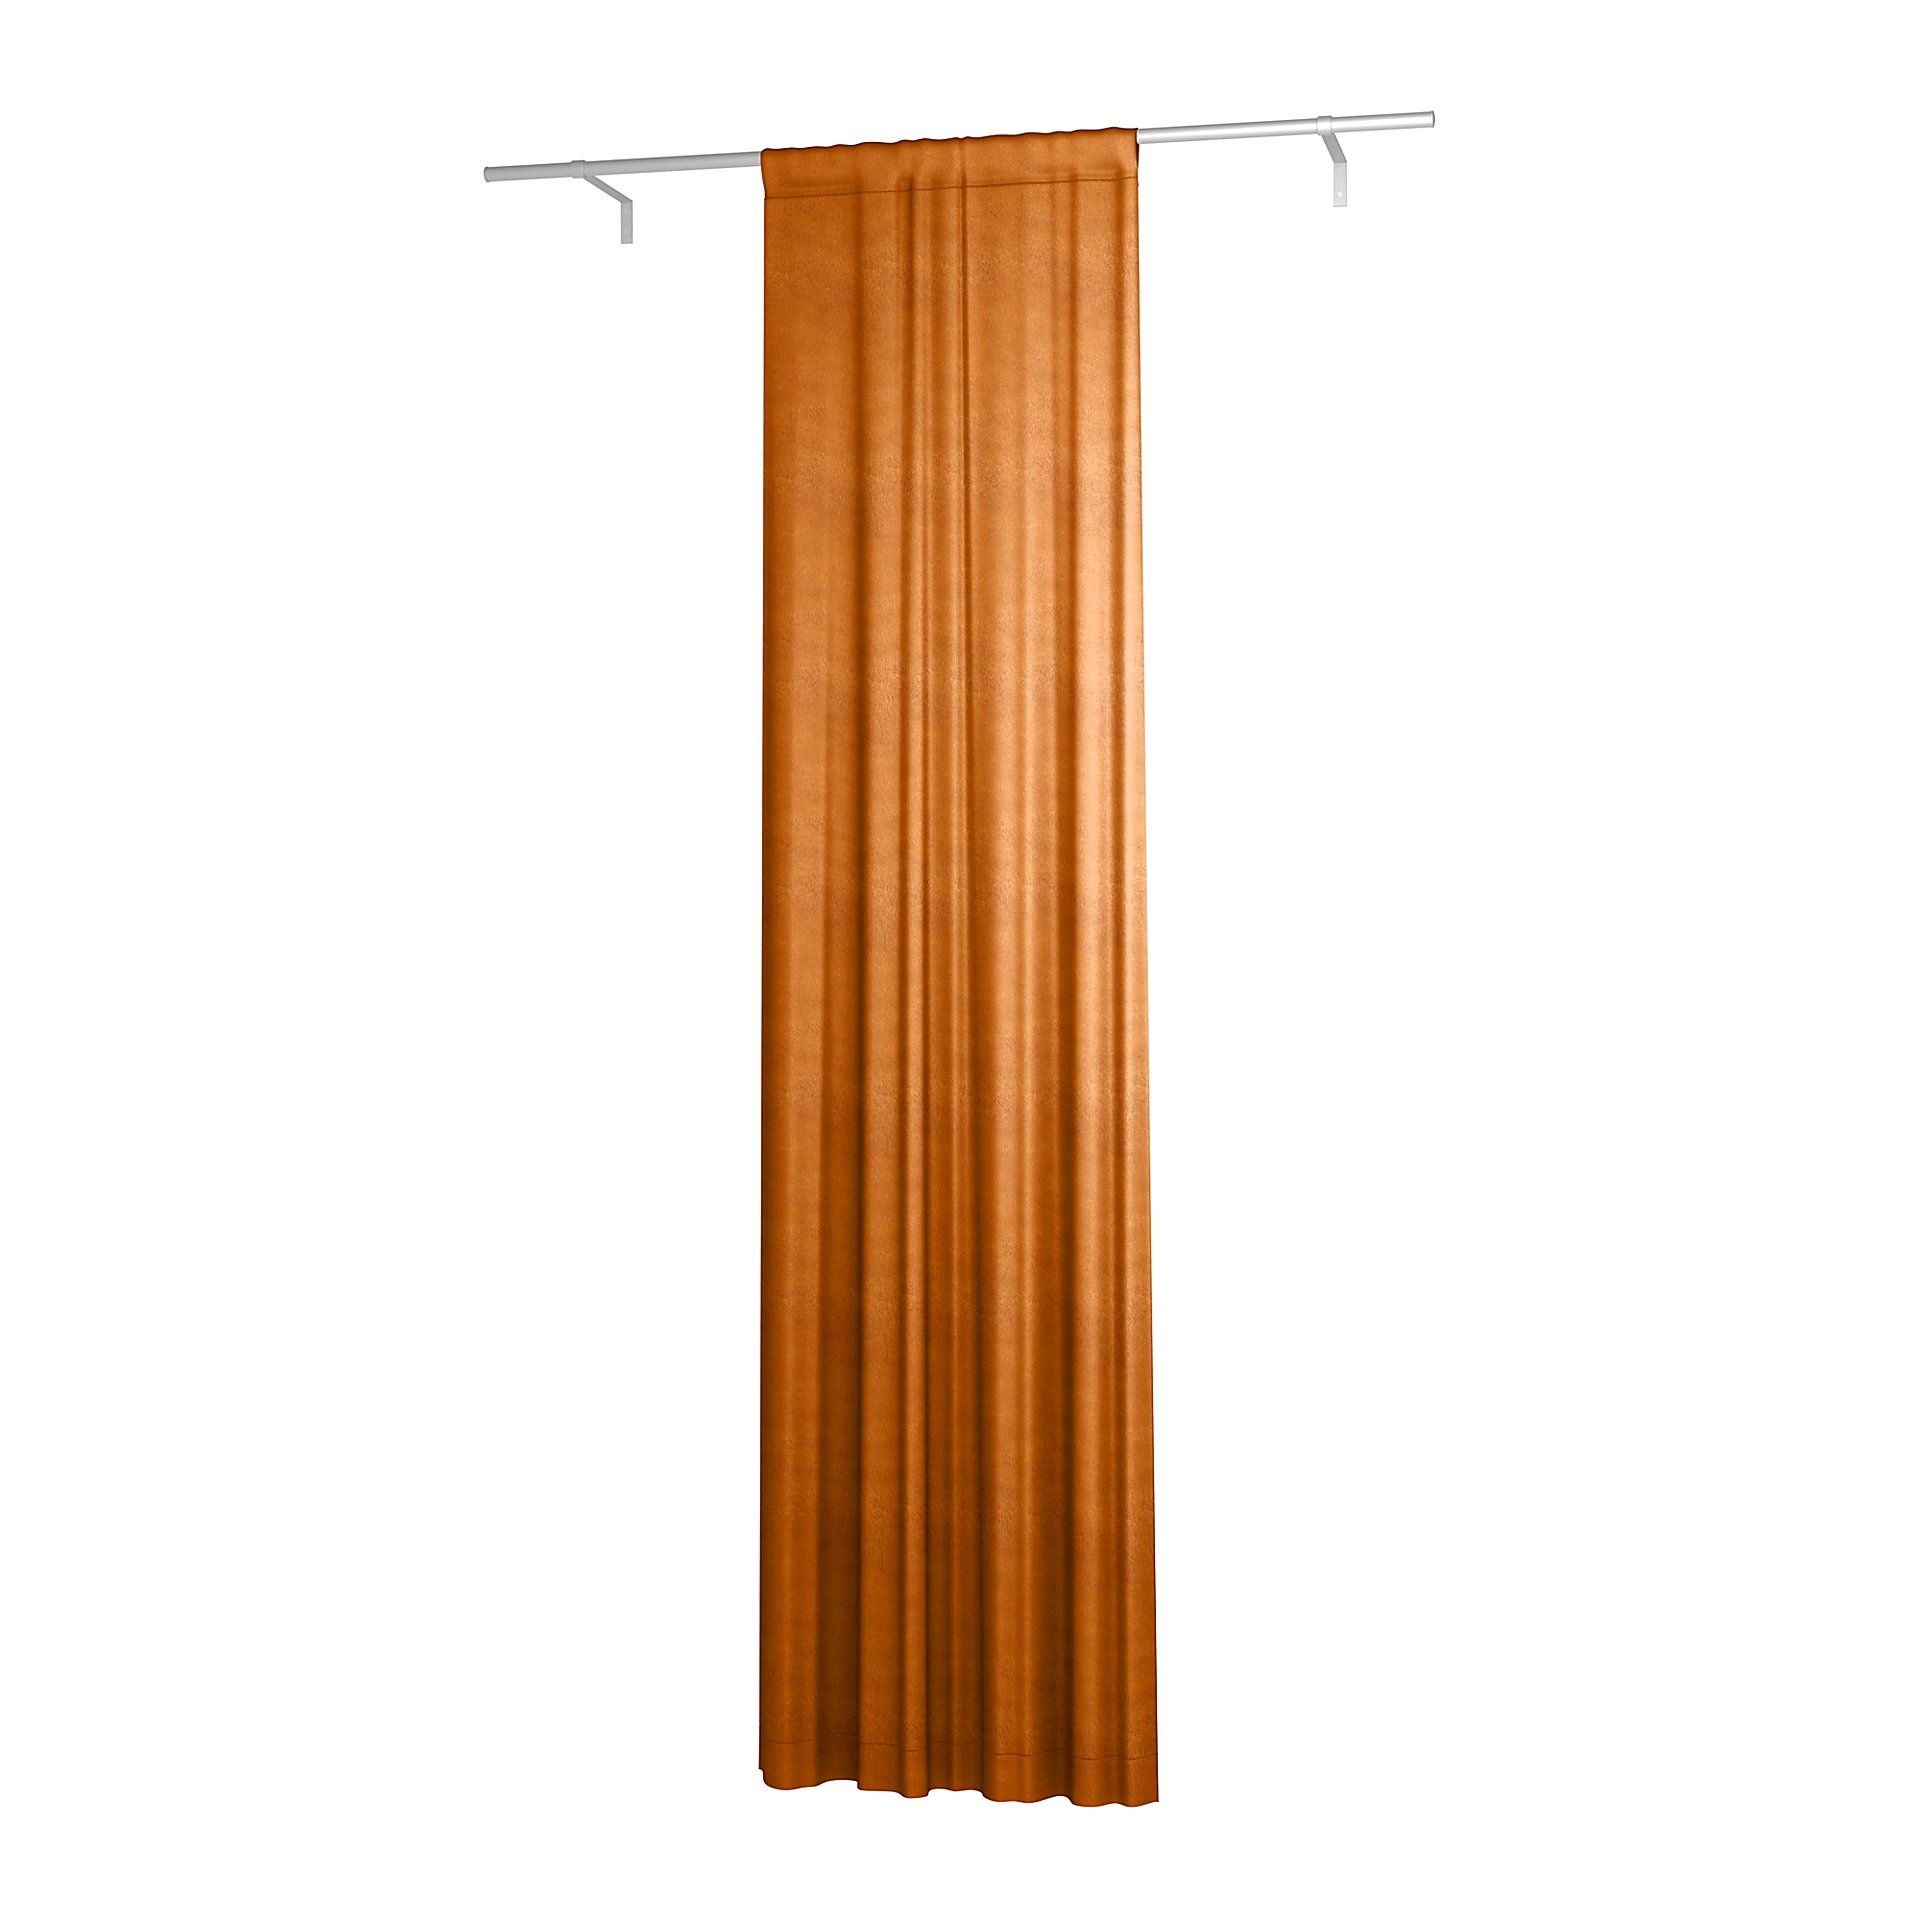 Single Width Curtain Panel with Tunnel/Creaseband, Lined, Customized, Cognac, Velvet - Bemz